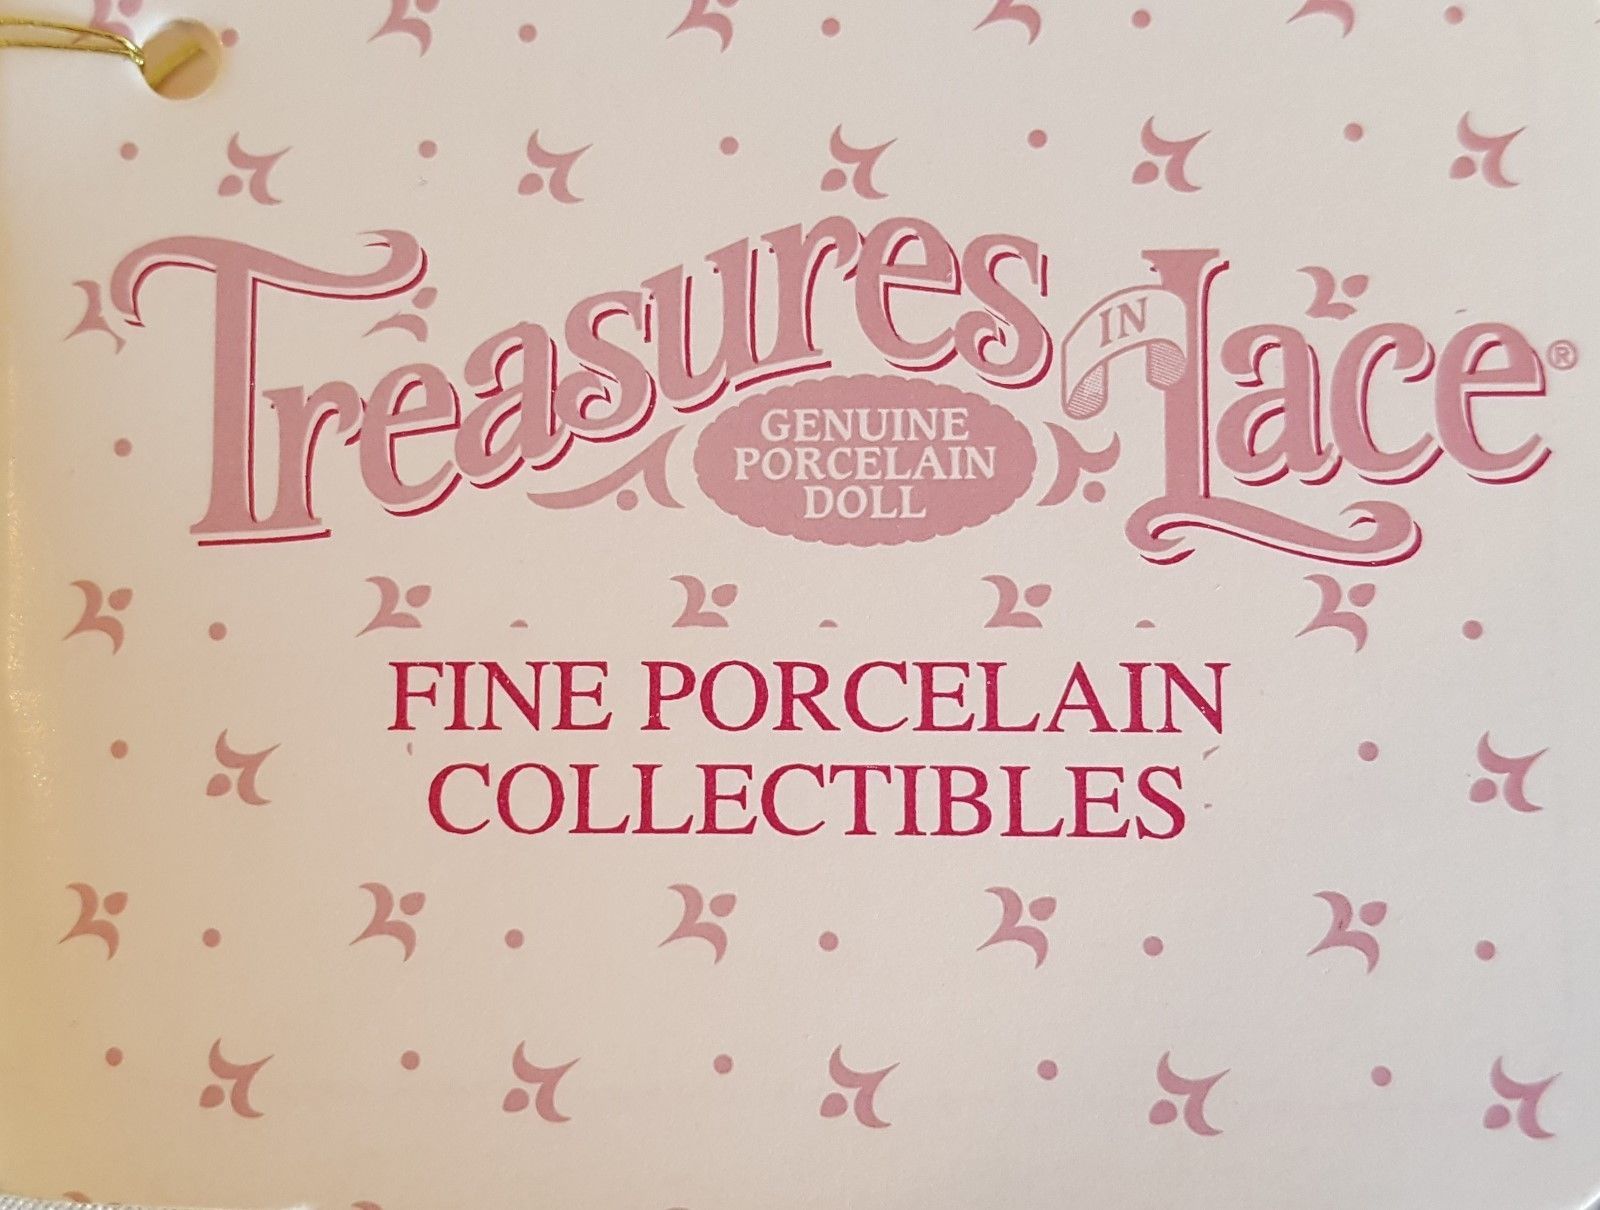 treasures in lace genuine porcelain doll